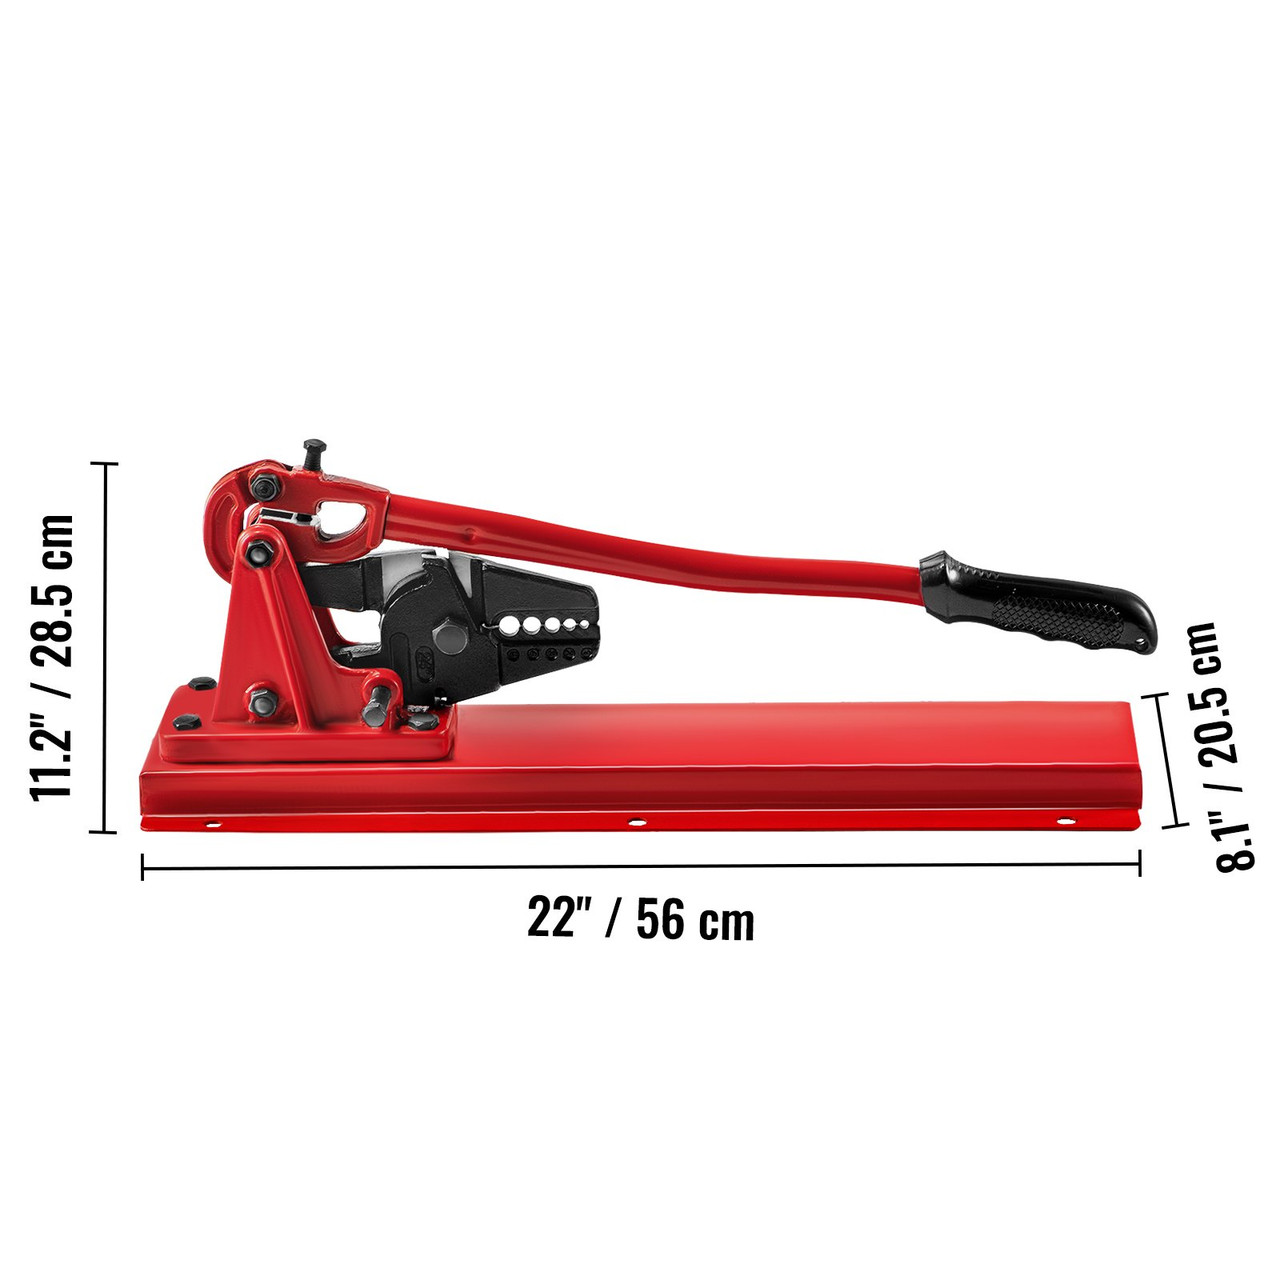 Bench Type Hand Swager, 24" Bench Type Swaging Tool, Bench Type Crimper for 1/16" 3/32" 1/8" 5/32" 3/16", CRV (HRC 35-45 Degree) Bench Type Crimping Tool, Bench Swager Tool for Cable Wire Rope